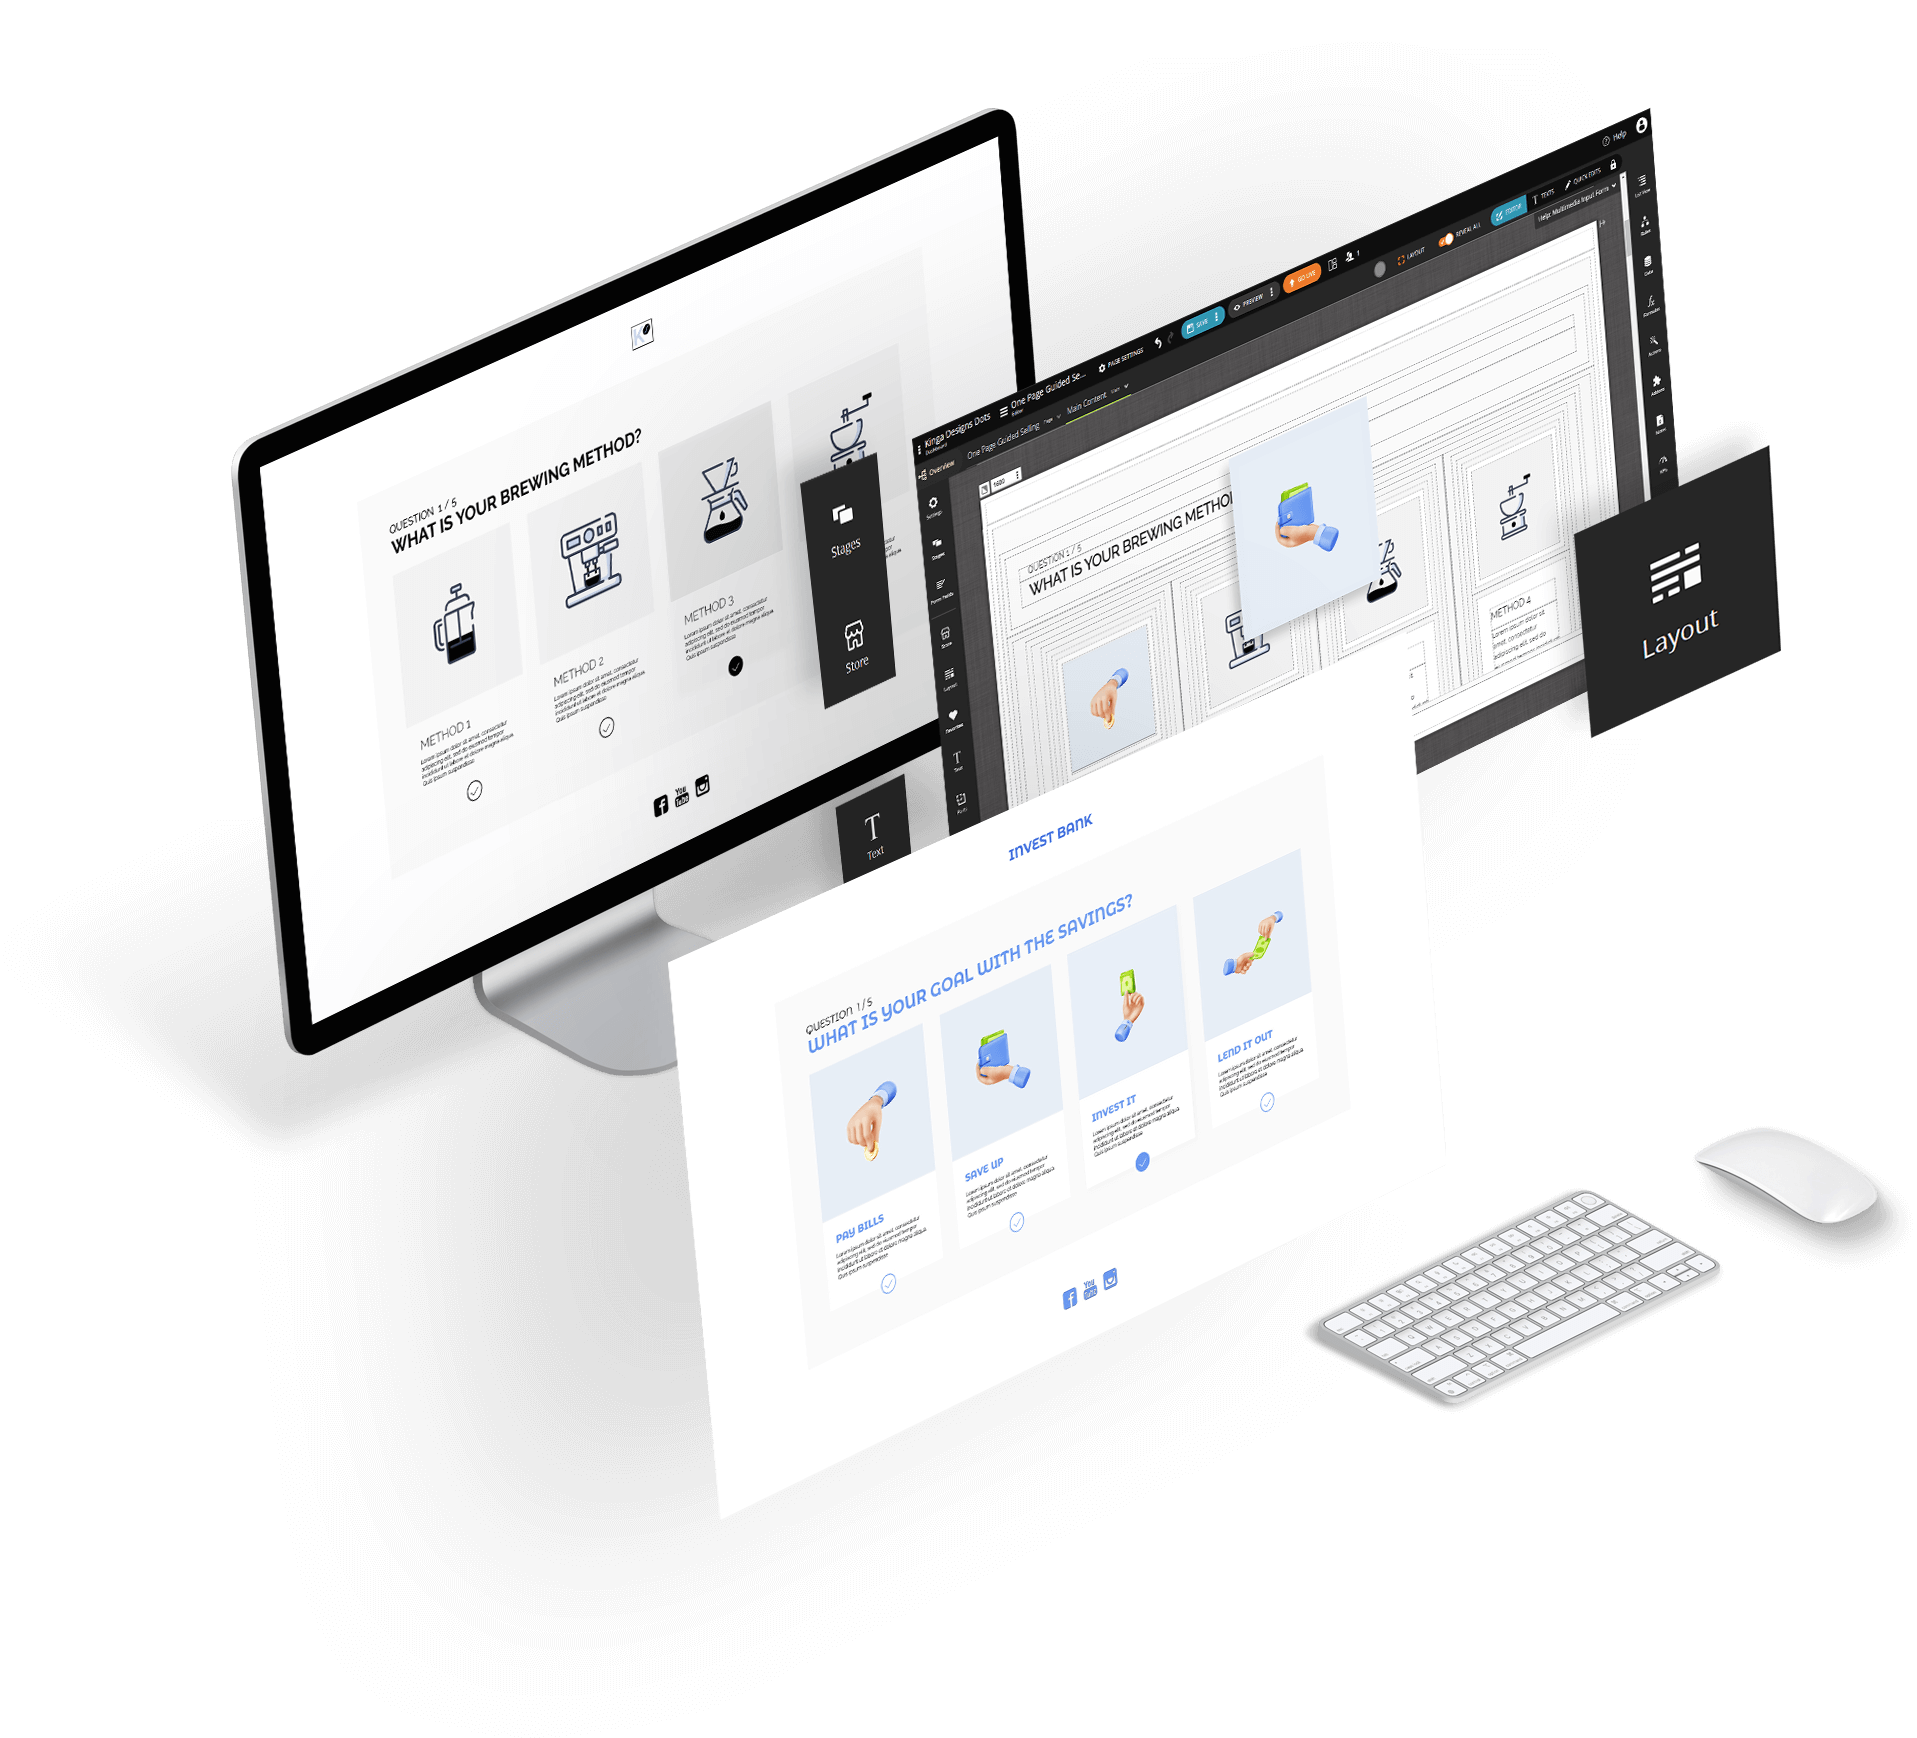 With Dot.vu you can create responsive layouts, ready for mobile devices and tablets 